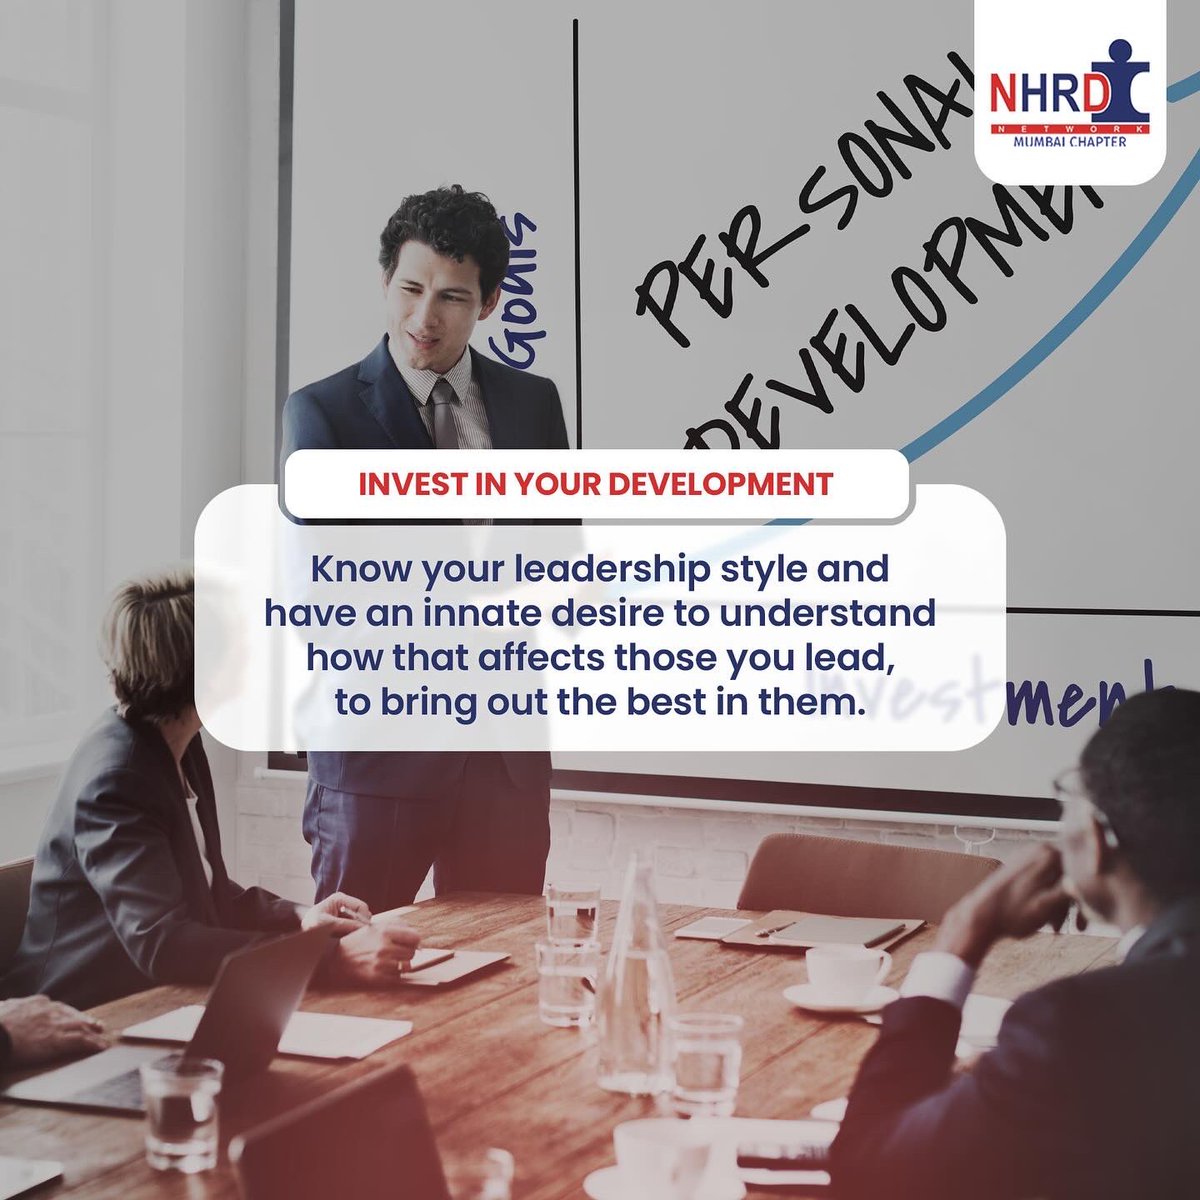 Leadership is all about understanding the emotions of the team to bring out the best in them. #NHRDN #NHRDNMumbai #Tips #TipOfTheDay #HRInsights #Networking #Network #HR #HRDepartment